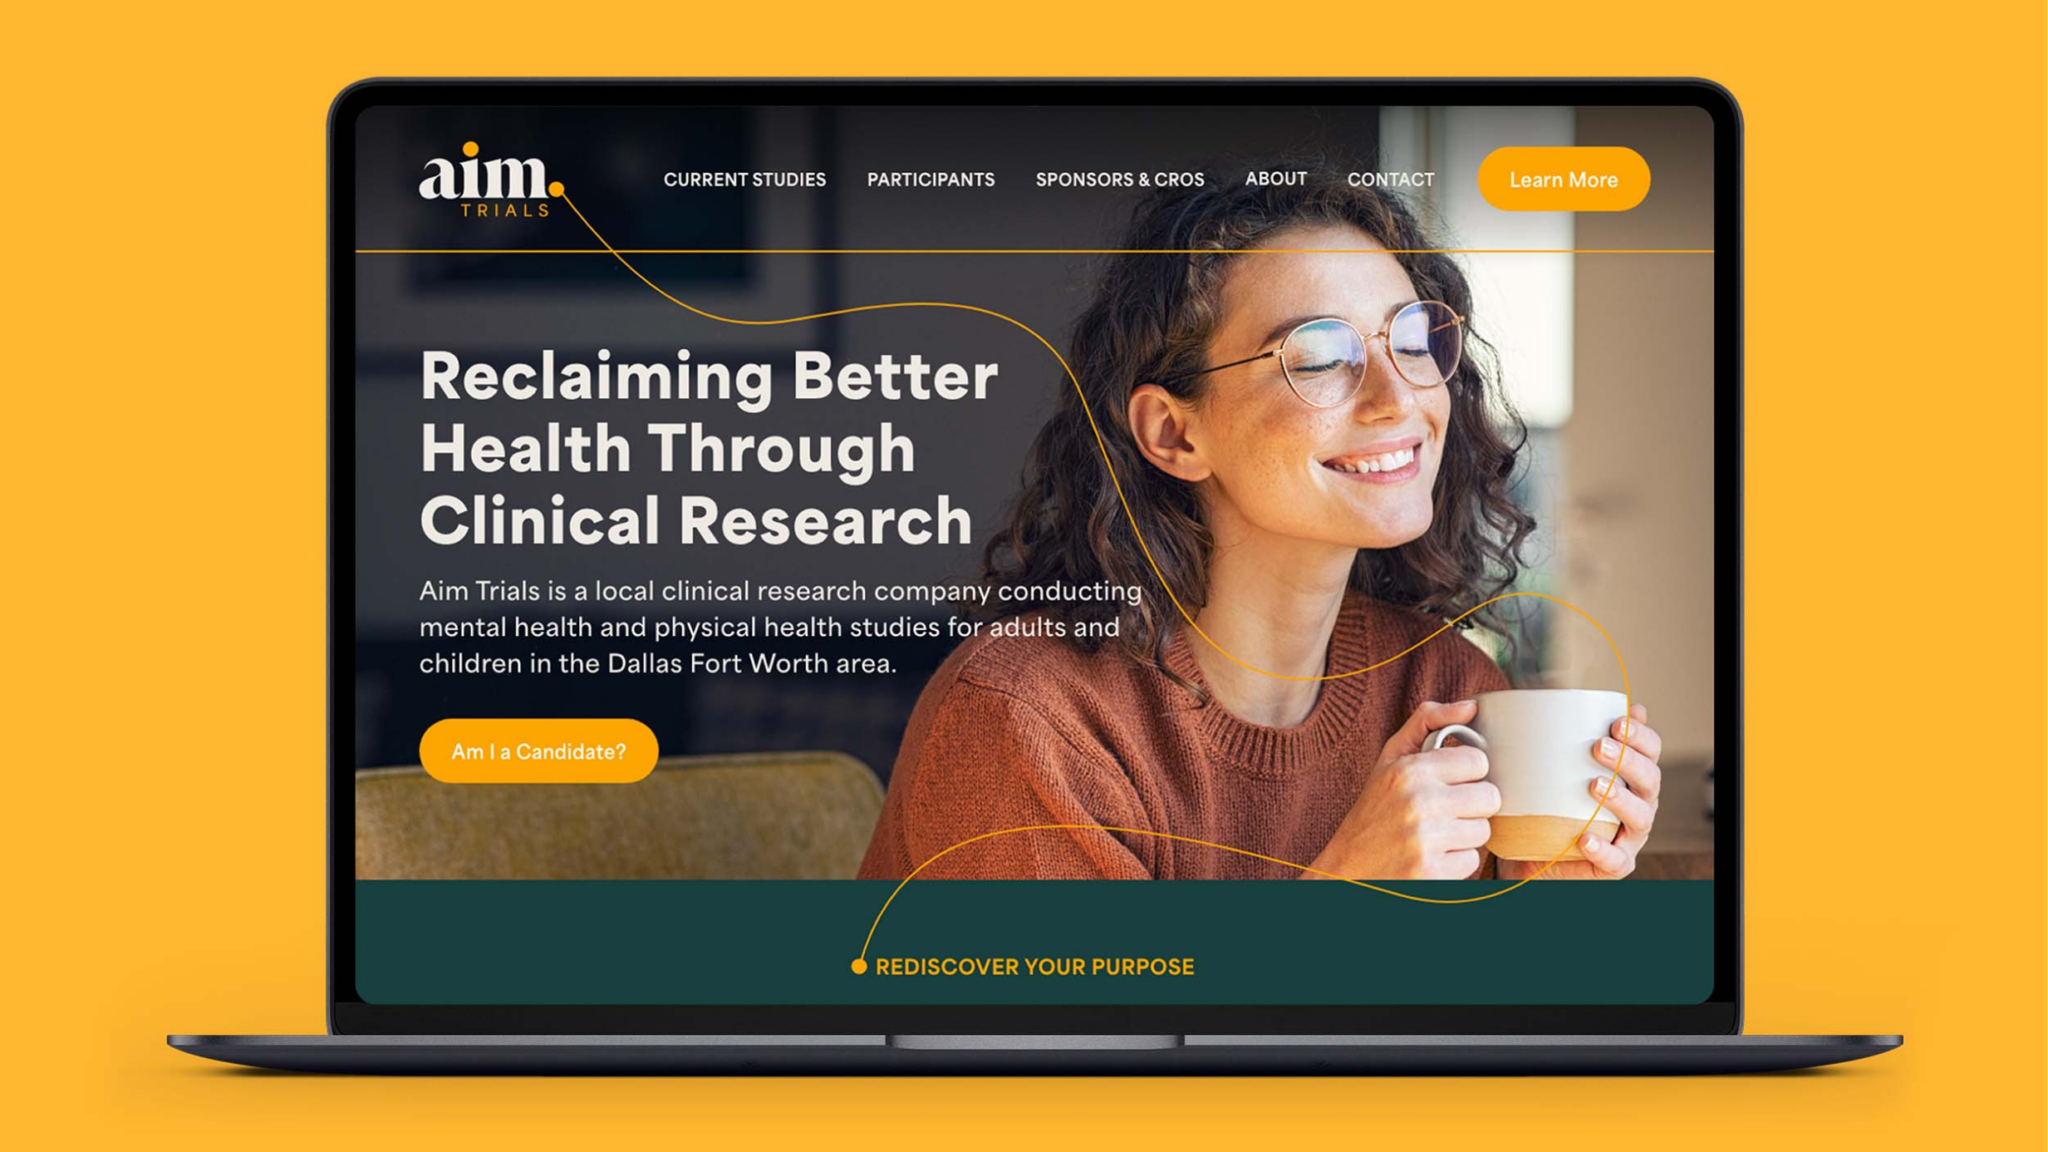 The aim trials landing page on a laptop that shows a woman holding a cup of coffee.